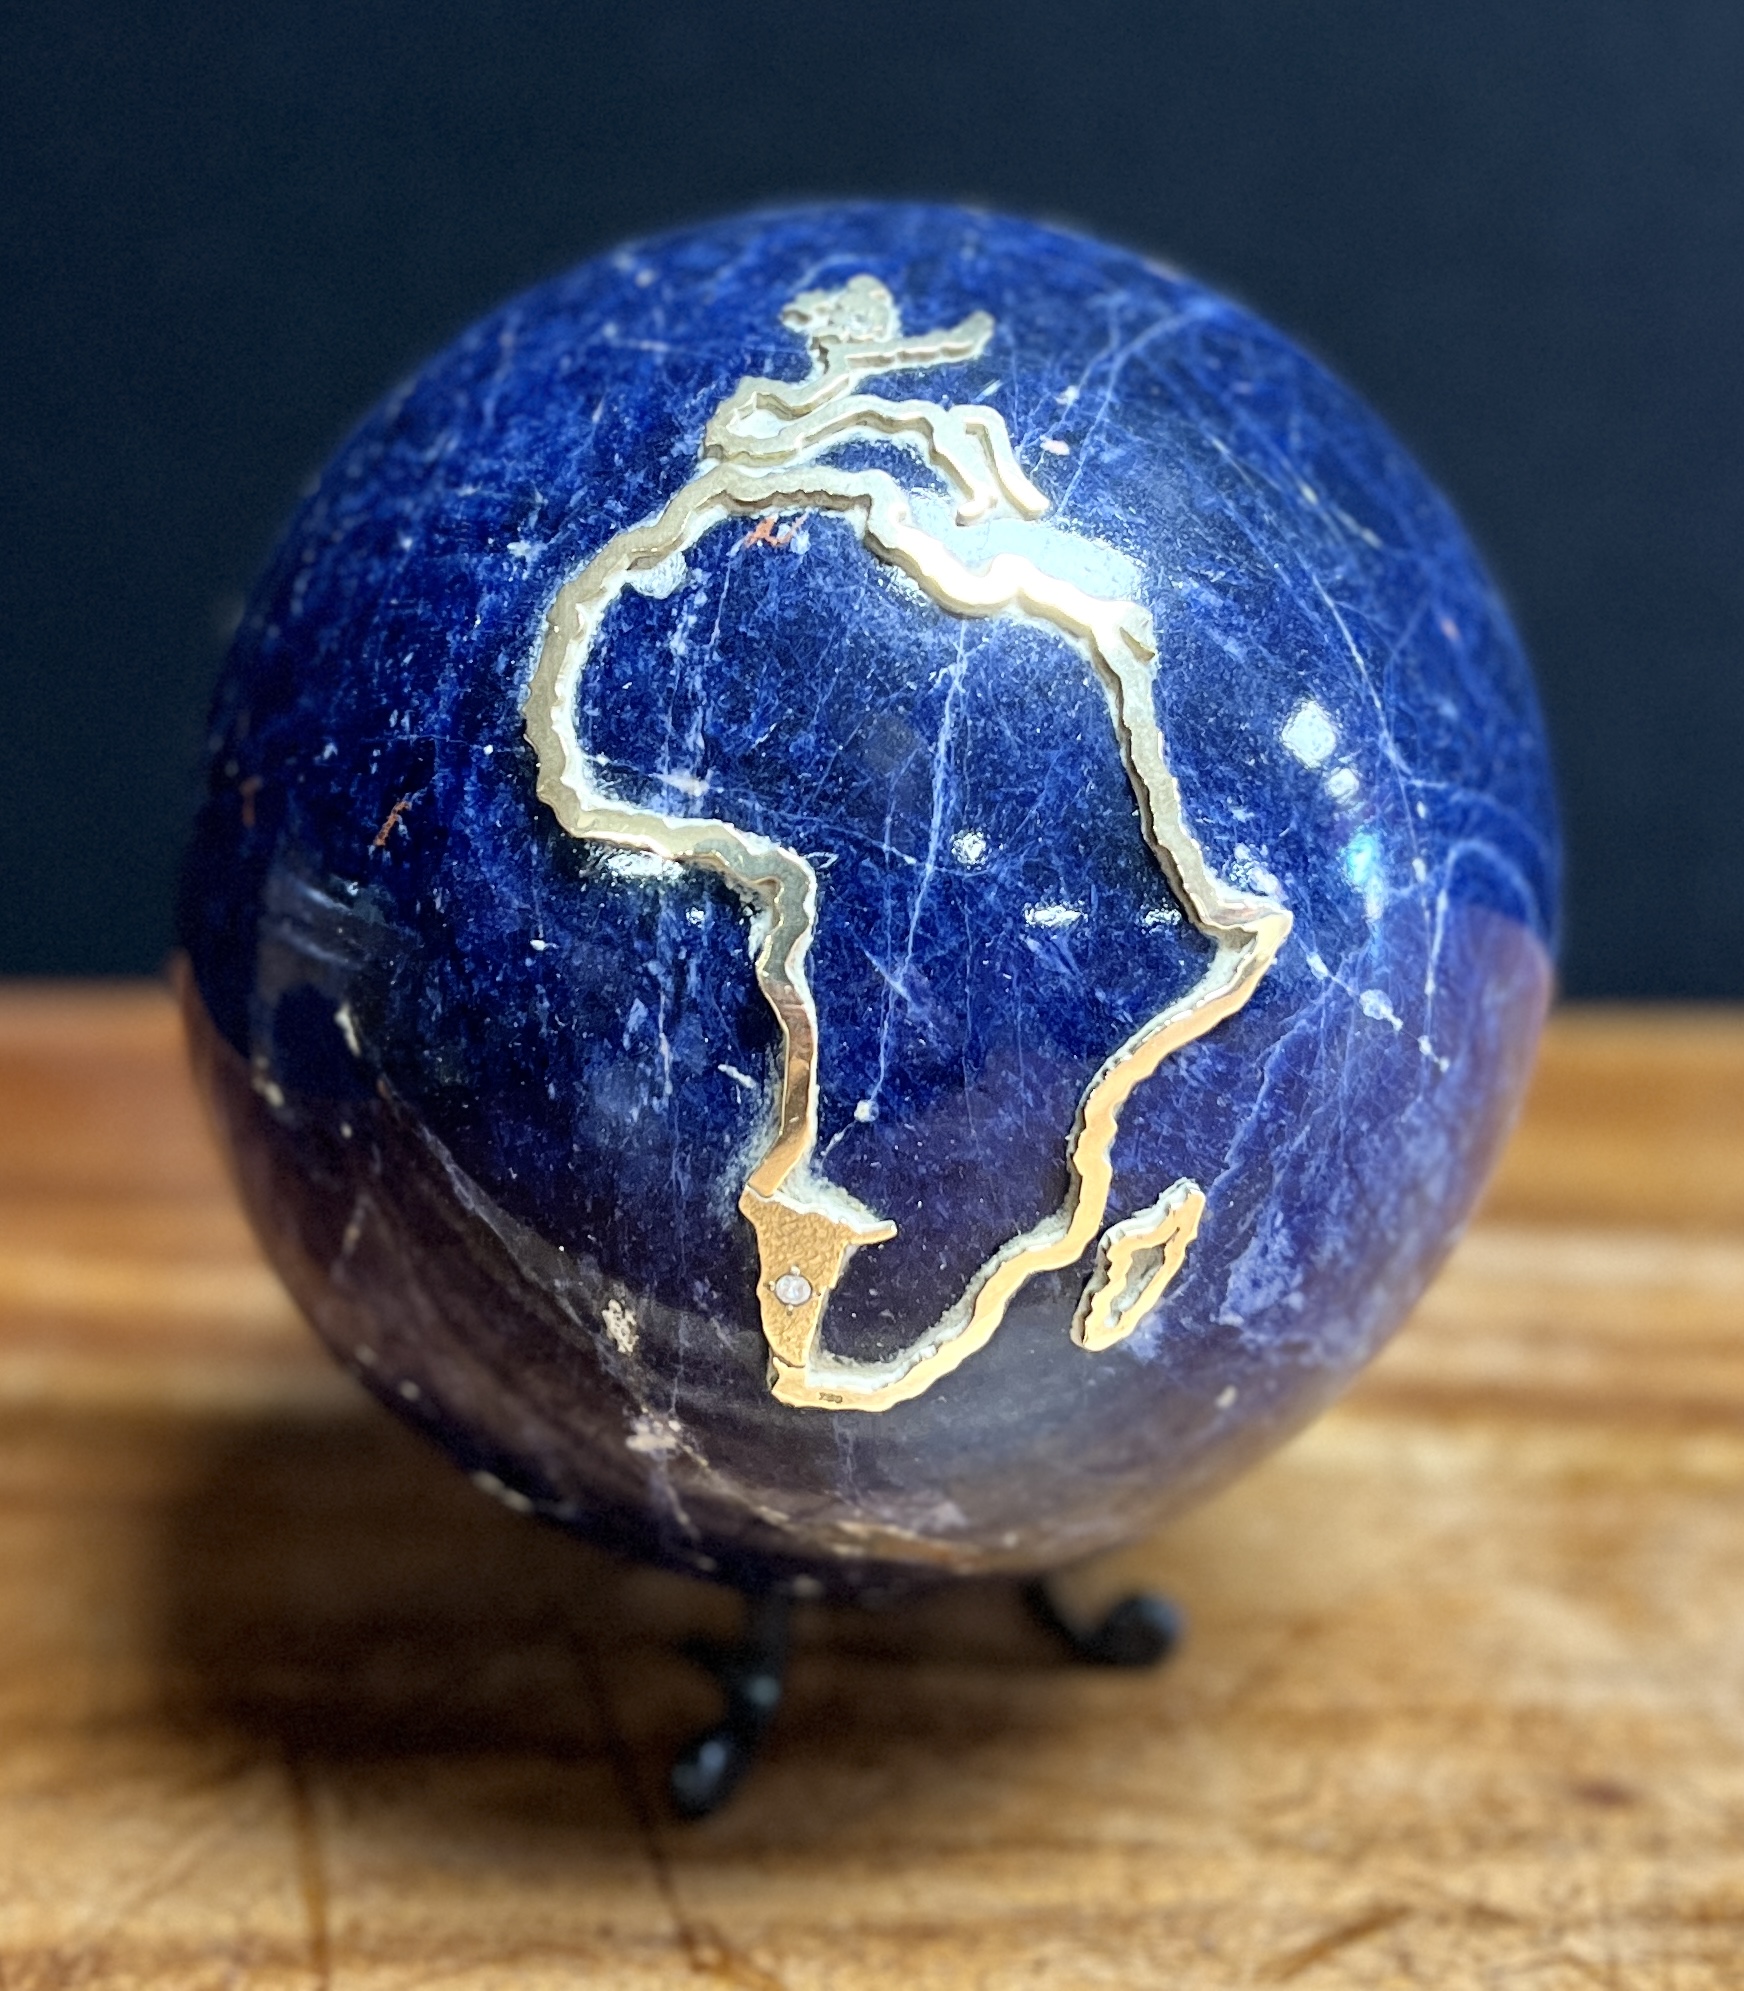 A LARGE LAPIS LAZULI SPHERE DEPICTING AN APPLIED COUNTRY OUTLINED IN 18CT GOLD SET WITH TWO - Image 5 of 11